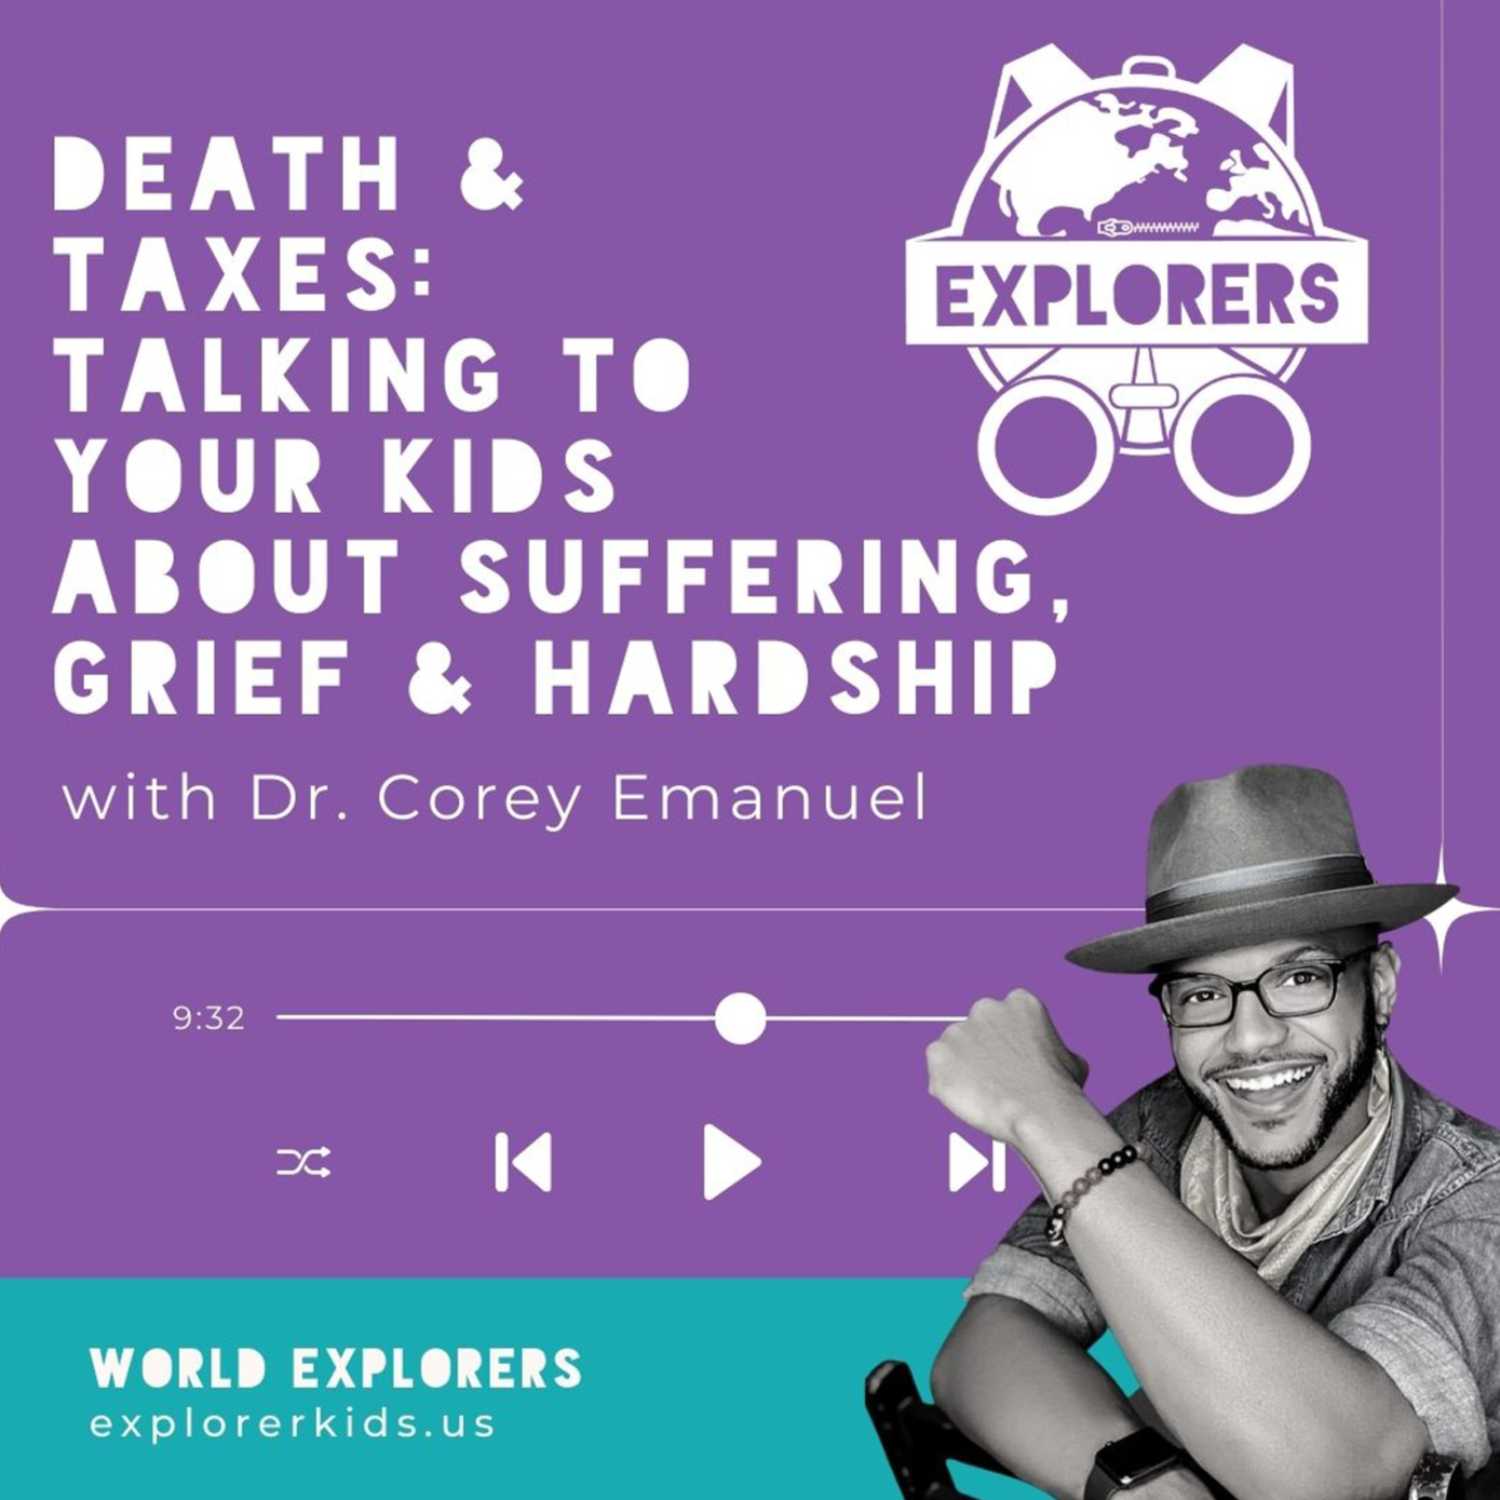 Death & Taxes: Talking to Your Kids About Suffering, Grief & Hardship